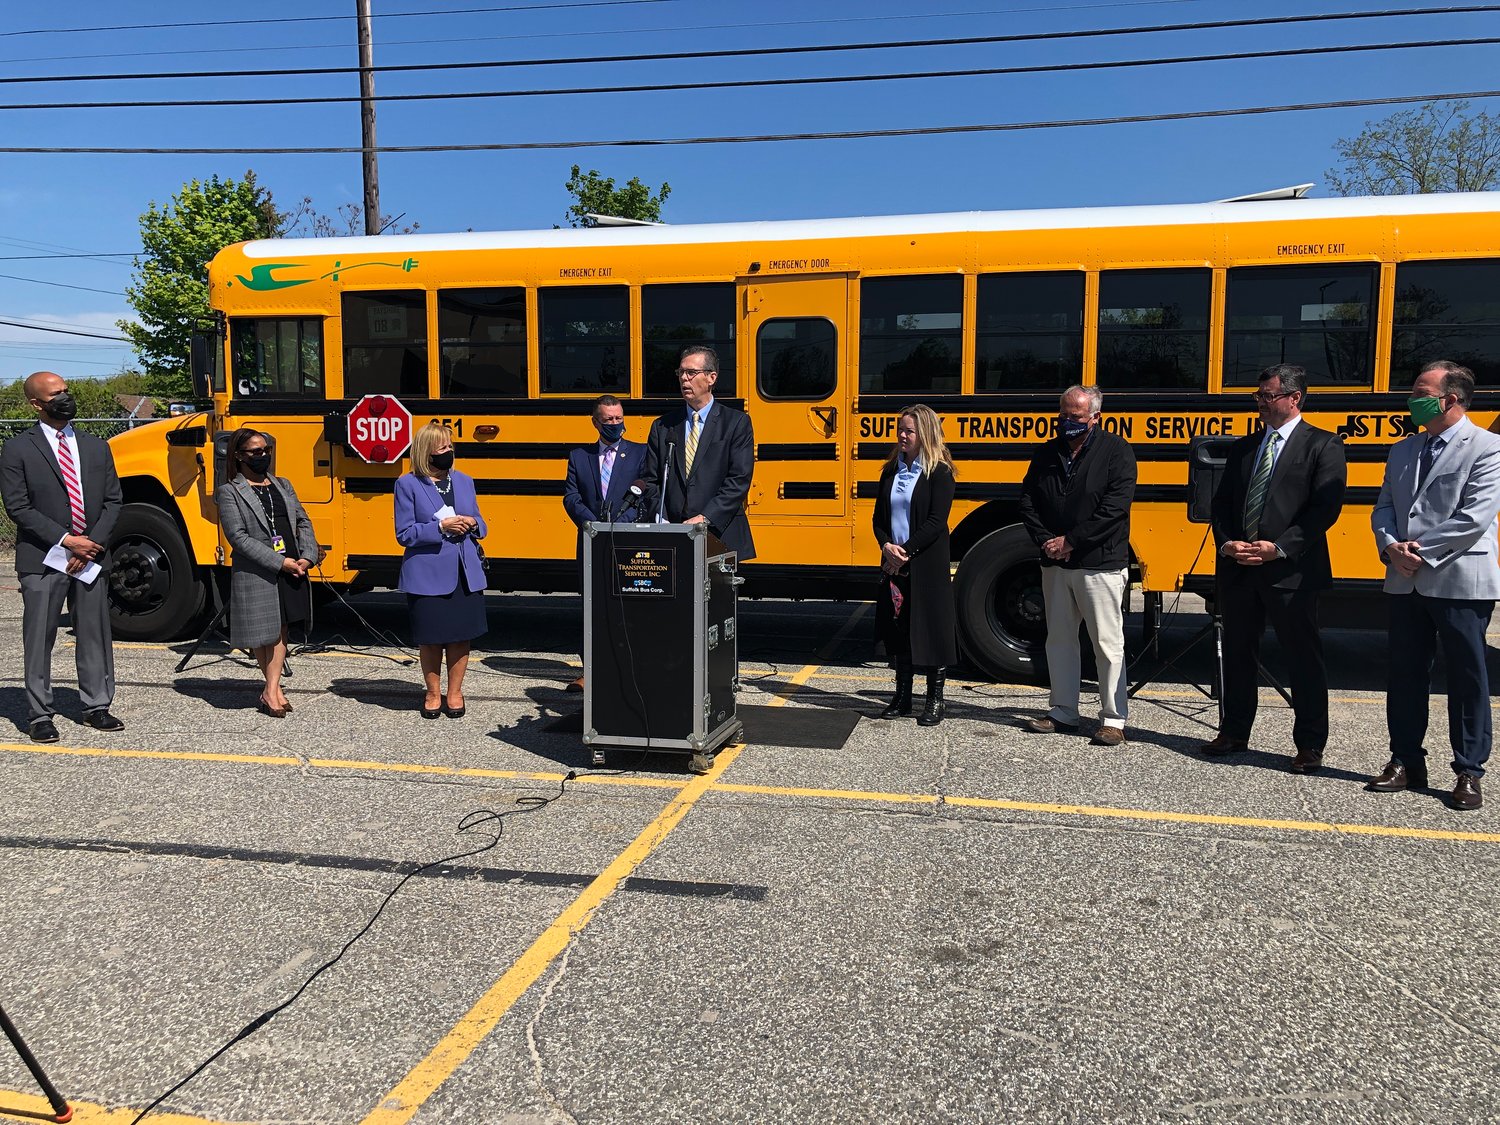 Bay Shore superintendent Joseph Bond speaks about the new electric bus fleet at a Tuesday, May 11 press conference in Bay Shore. The new “green” fleet is free to taxpayers, Bond said, and will save at least 8,000 gallons of diesel fuel and well over 54 metric tons of CO2 emissions.